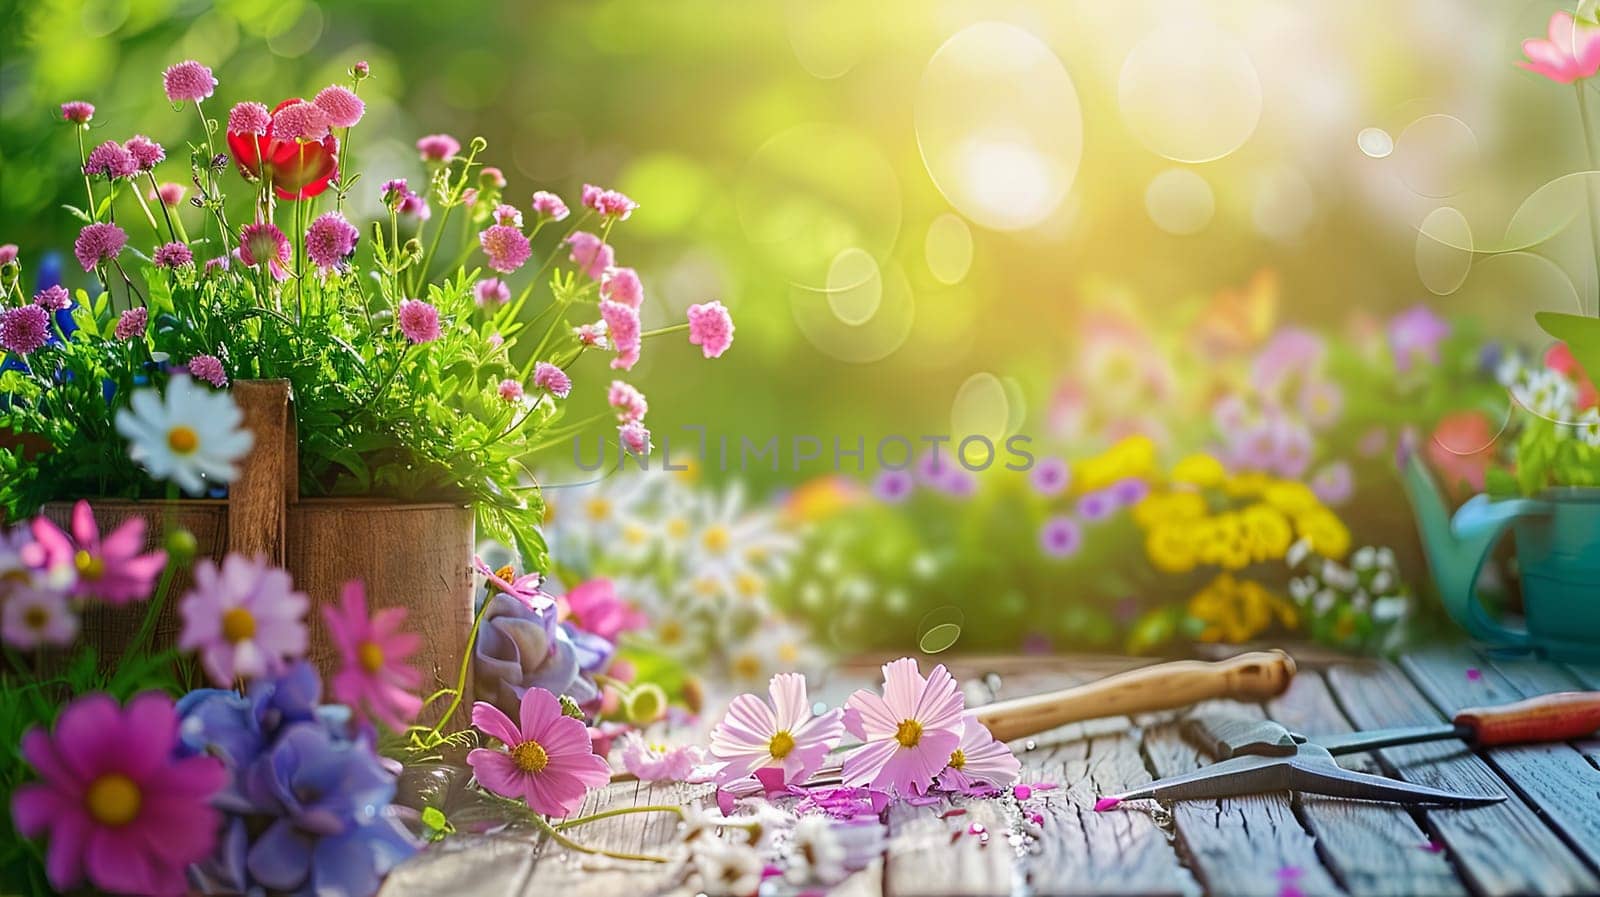 A wooden table is laden with an assortment of colorful flowers, creating a vibrant display against a blurred natural backdrop.